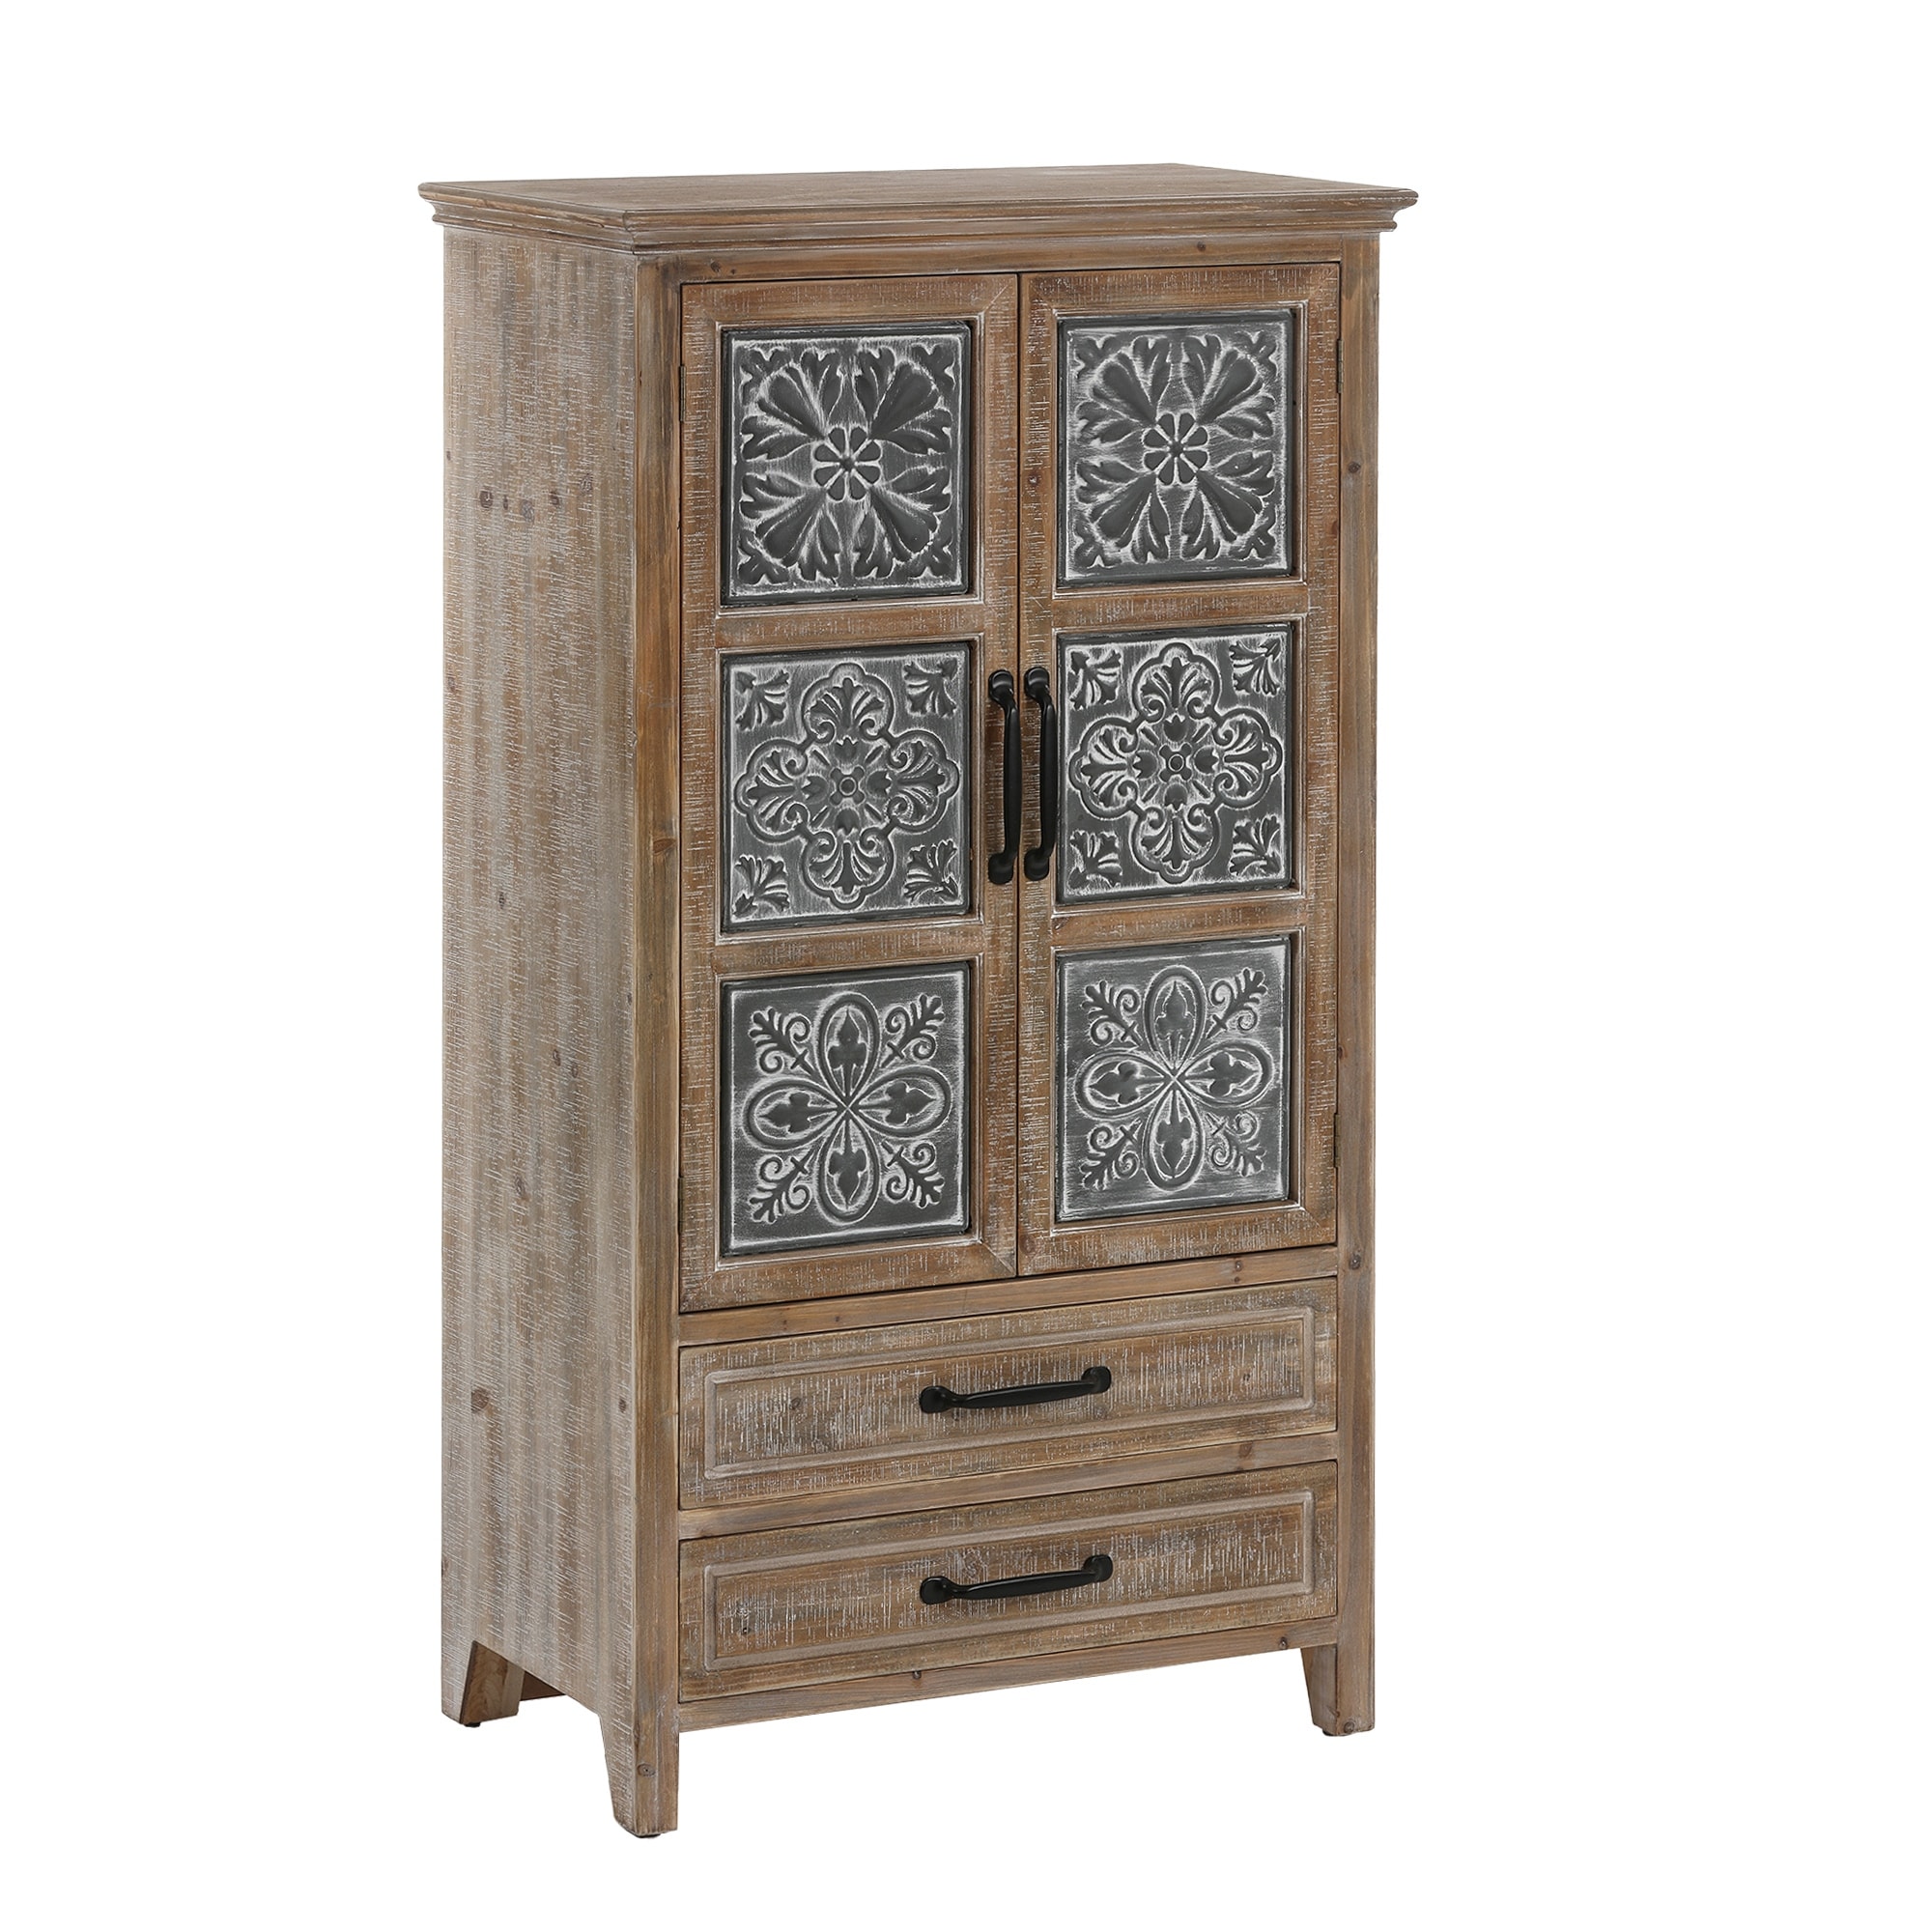 https://ak1.ostkcdn.com/images/products/is/images/direct/baa18f4fa9e32bd07432f05c435c9f5f20941aa0/Wood-and-Metal-Wardrobe-Storage-Cabinet.jpg